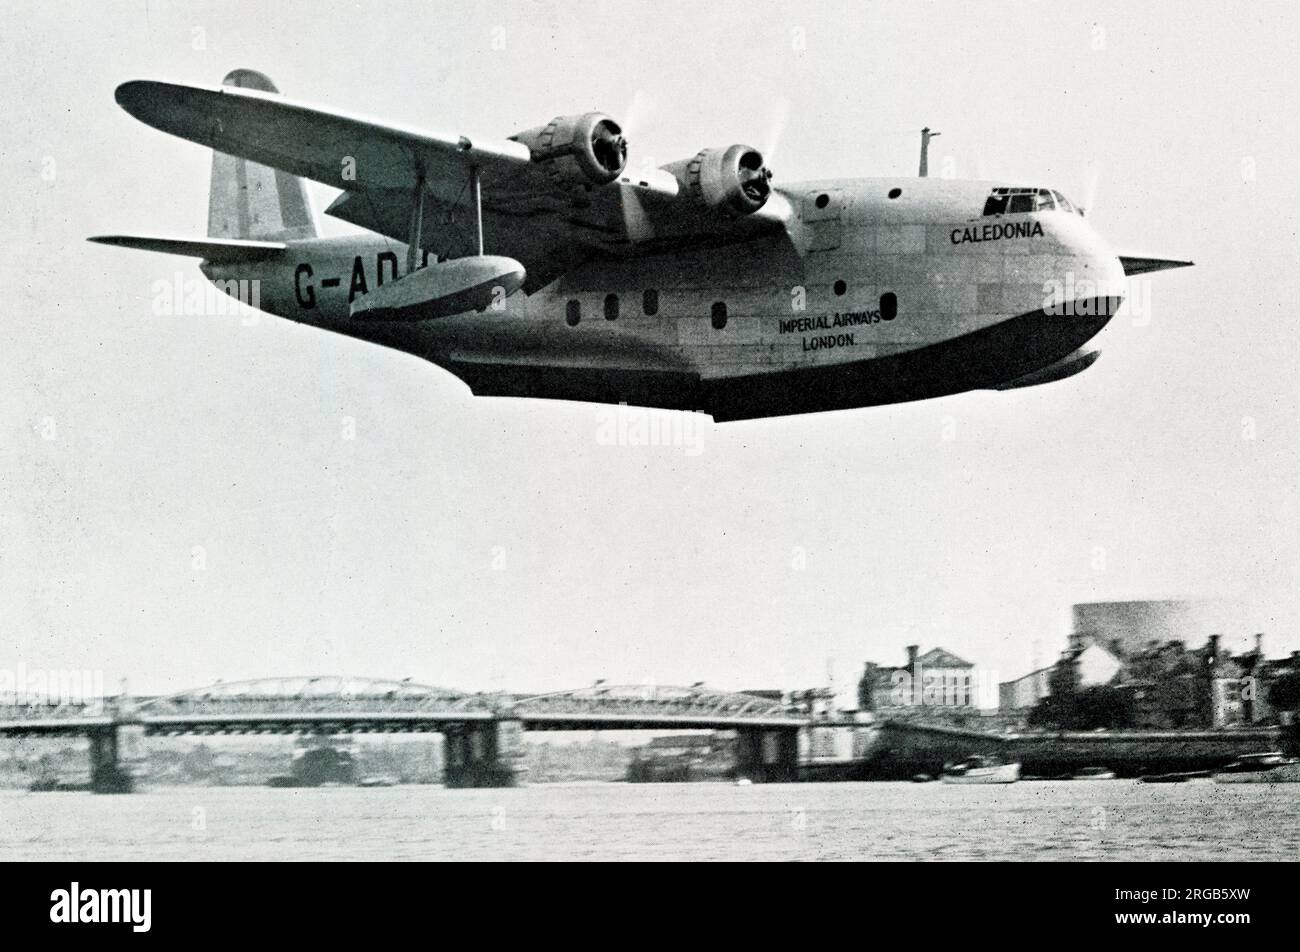 Imperial Airways, Short Empire Flying Boat, 'Caledonia' Aircraft Stock Photo